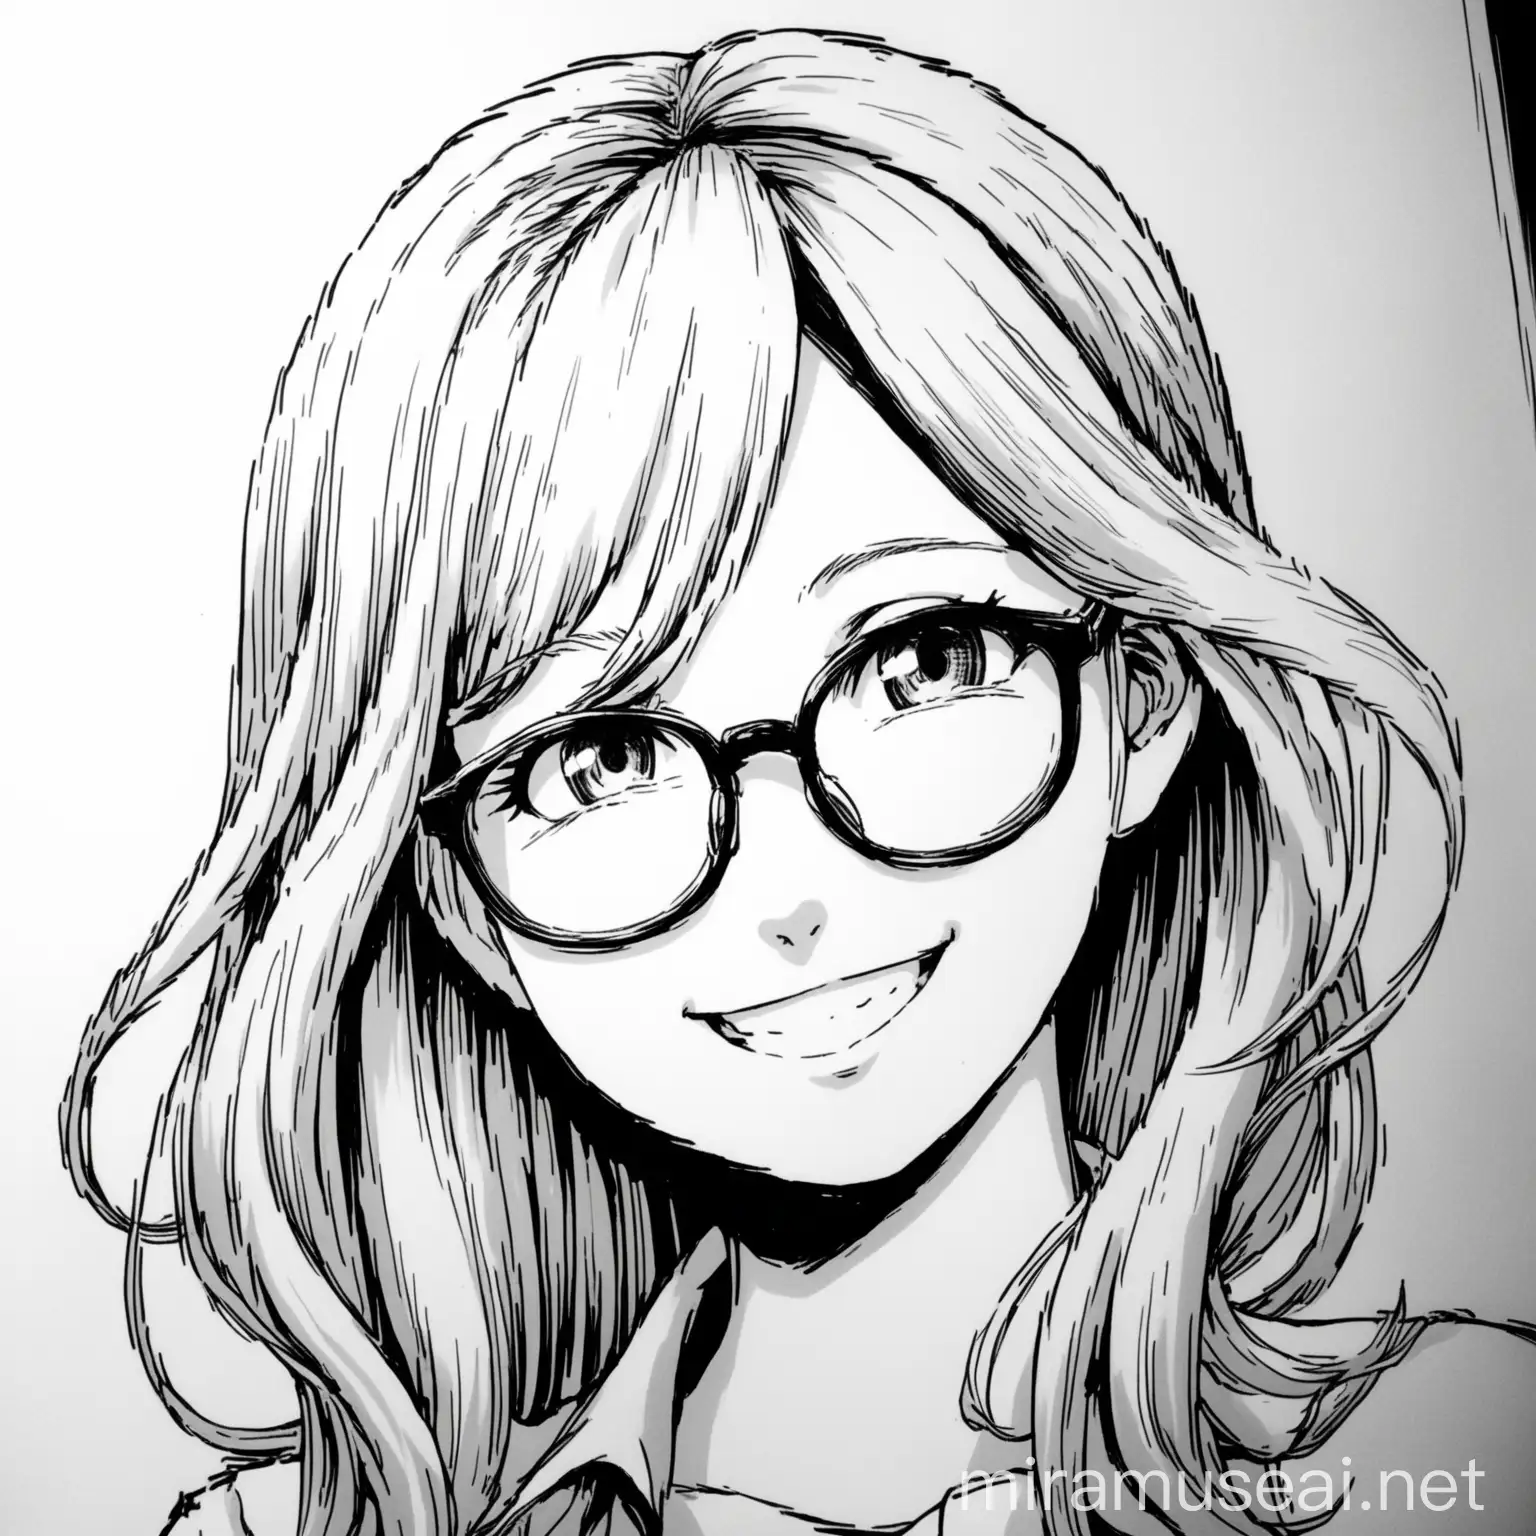 A manga style draw in black and white of a beautifull tall blond gil wearing glasses, she's smilling her hair is medium